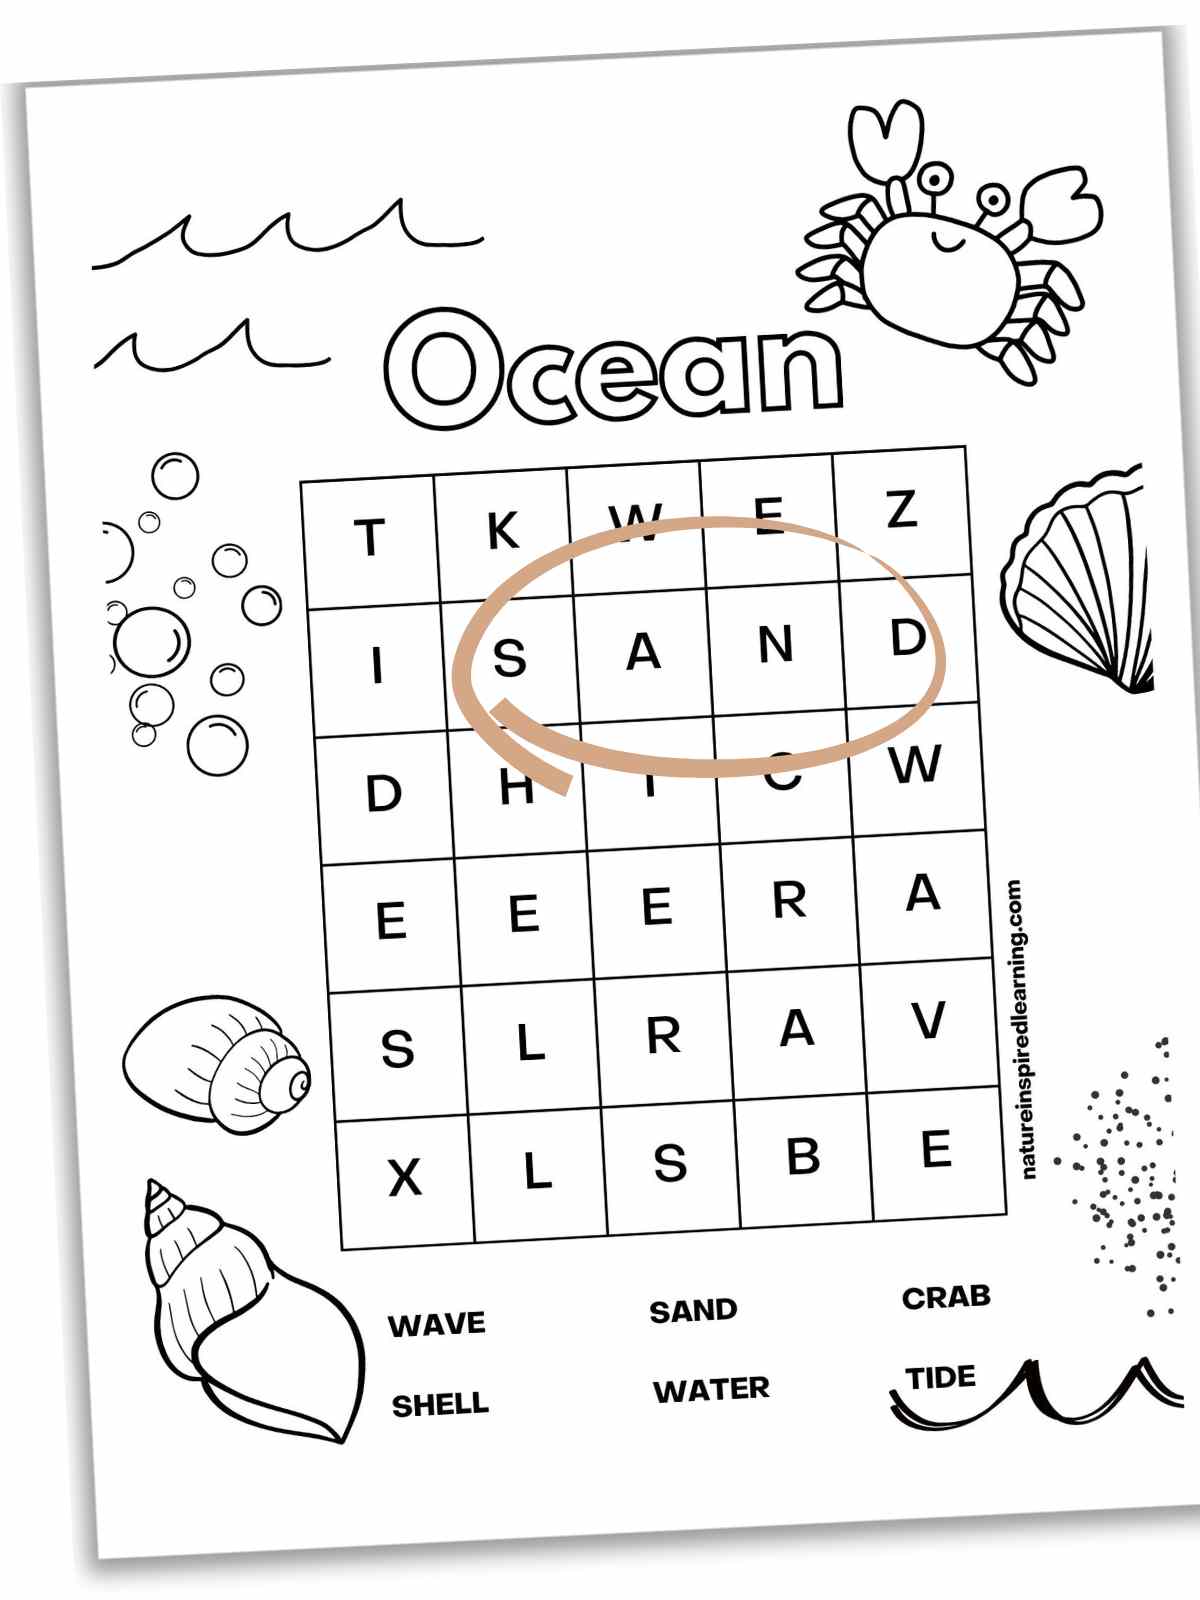 Simple word search with ocean words and ocean images around the border. Sand circled in brown.